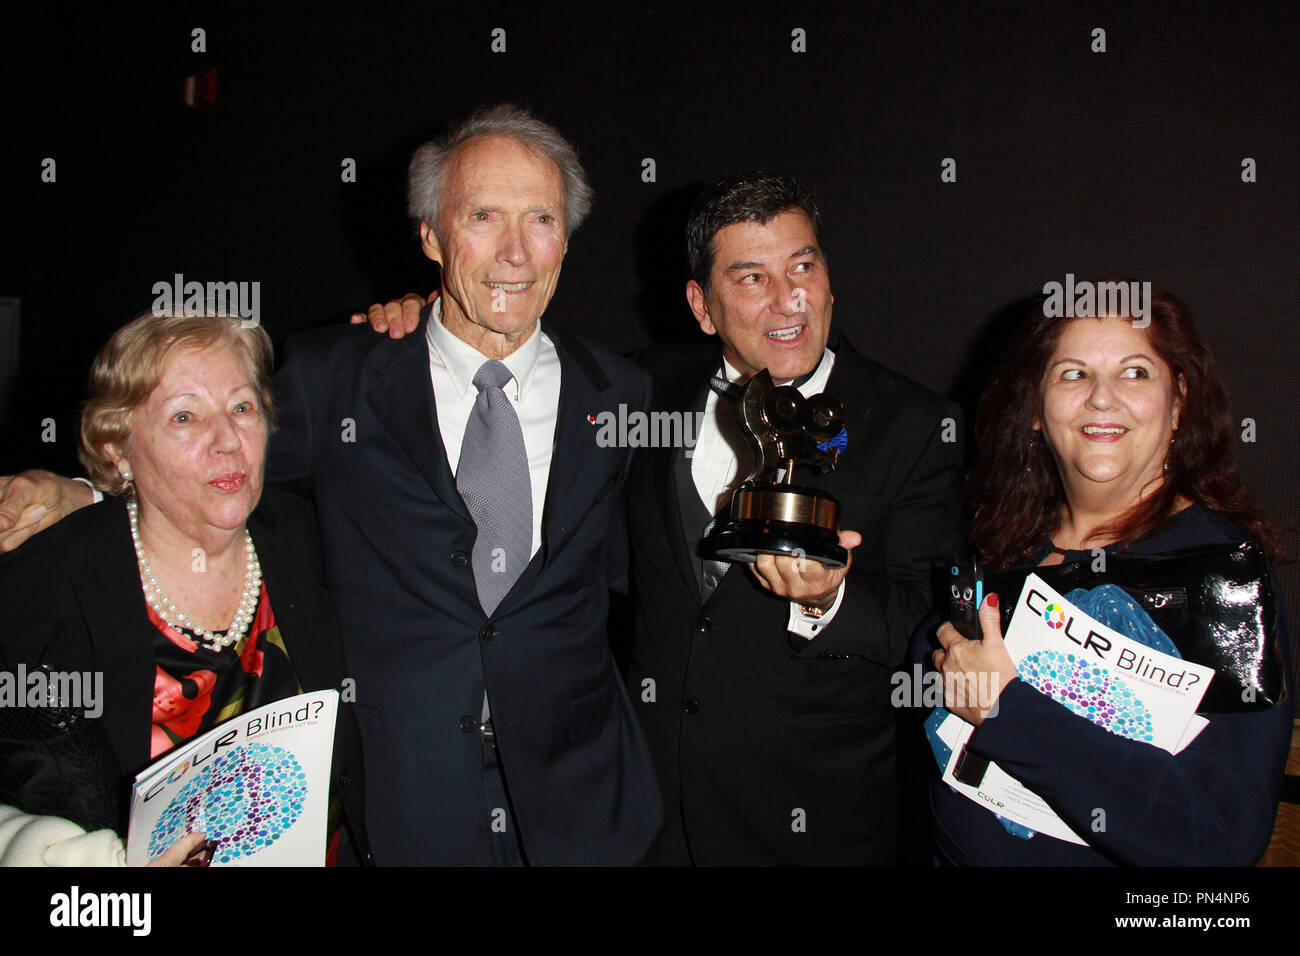 Clint Eastwood, Stephen Campanelli  02/06/2016 2016 Society Of Camera Operators Lifetime Achievement Awards held at the Paramount Theater in Hollywood, CA Photo by Kazuki Hirata / HNW / PictureLux Stock Photo